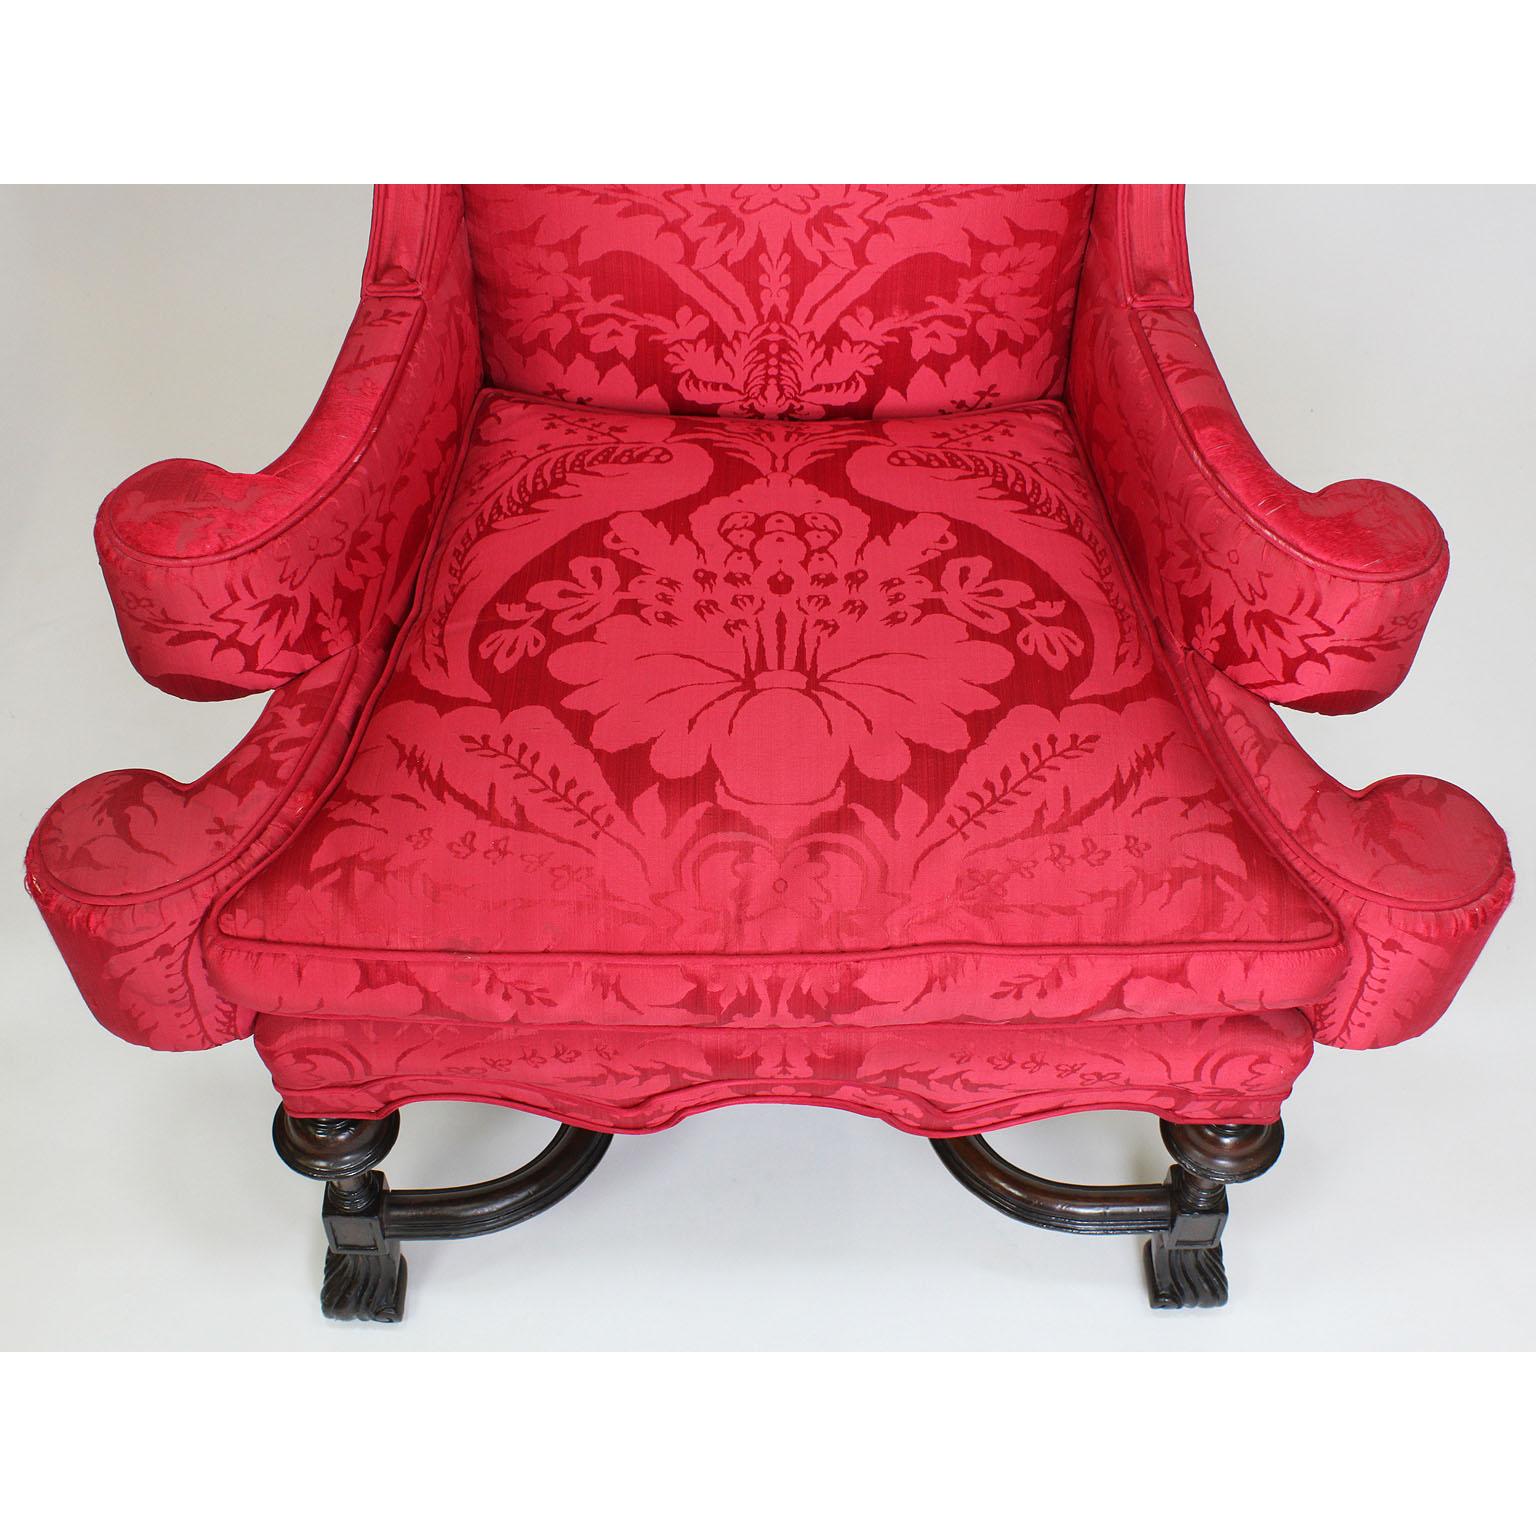 Silk Rare Pair of English 19th Century William & Mary Style Mahogany Throne Armchairs For Sale